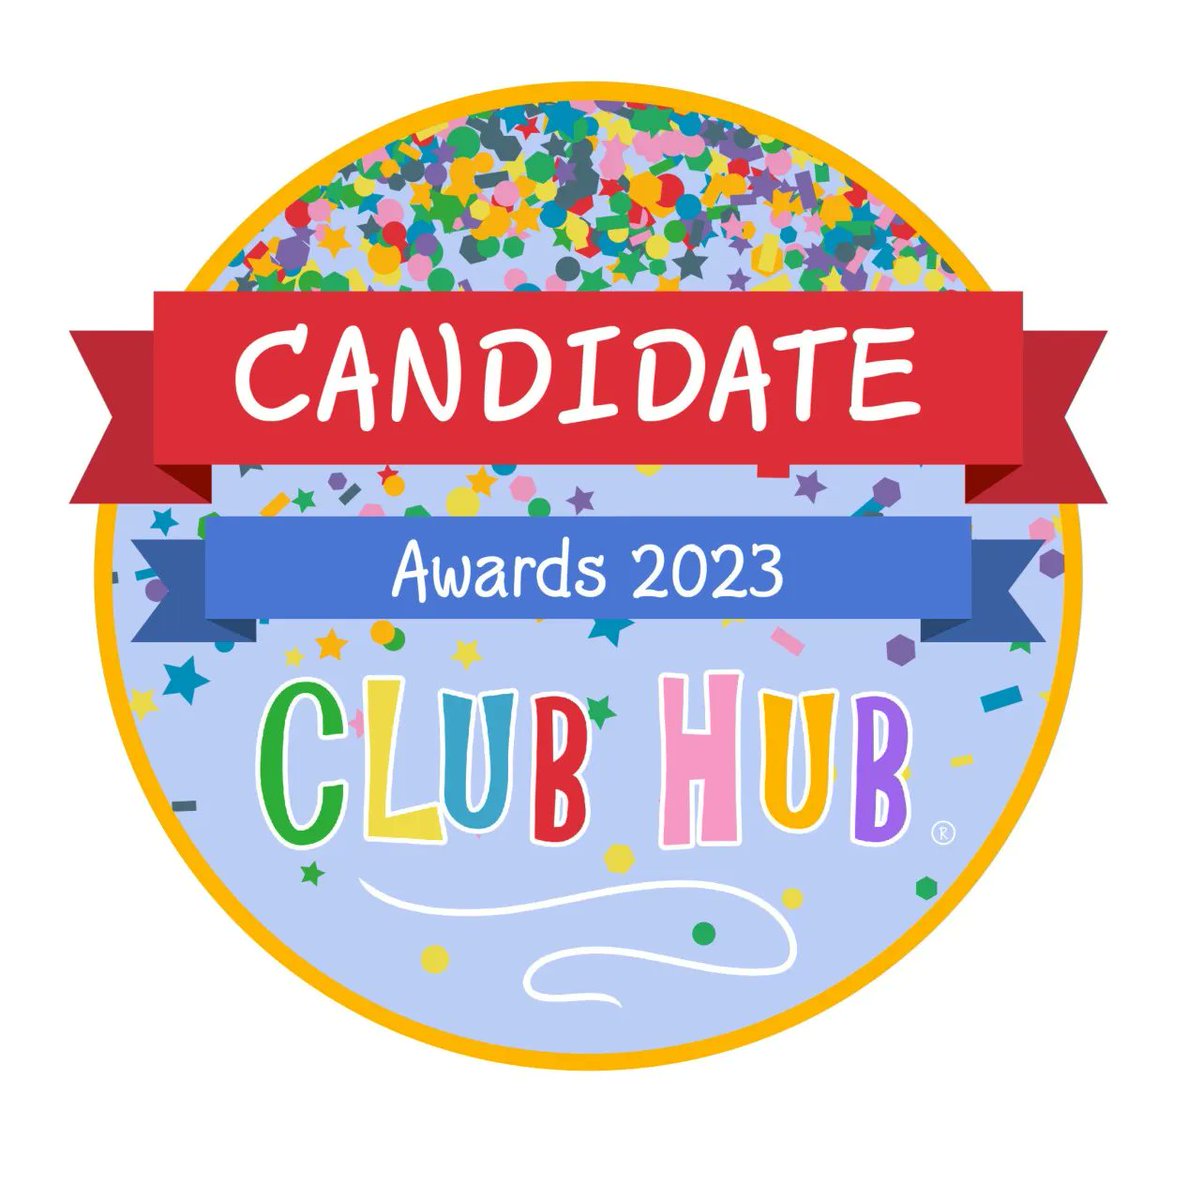 🥳🤩🎉We are very excited to announce that we are candidates in the 2023 Club 
Hub awards🥳🤩🎉 

The Club Hub Awards are National Awards for childrens activity providers. Wish us luck🤞 

#Rugbytots #clubhubawards2023 #clubhubmember #Cheshire